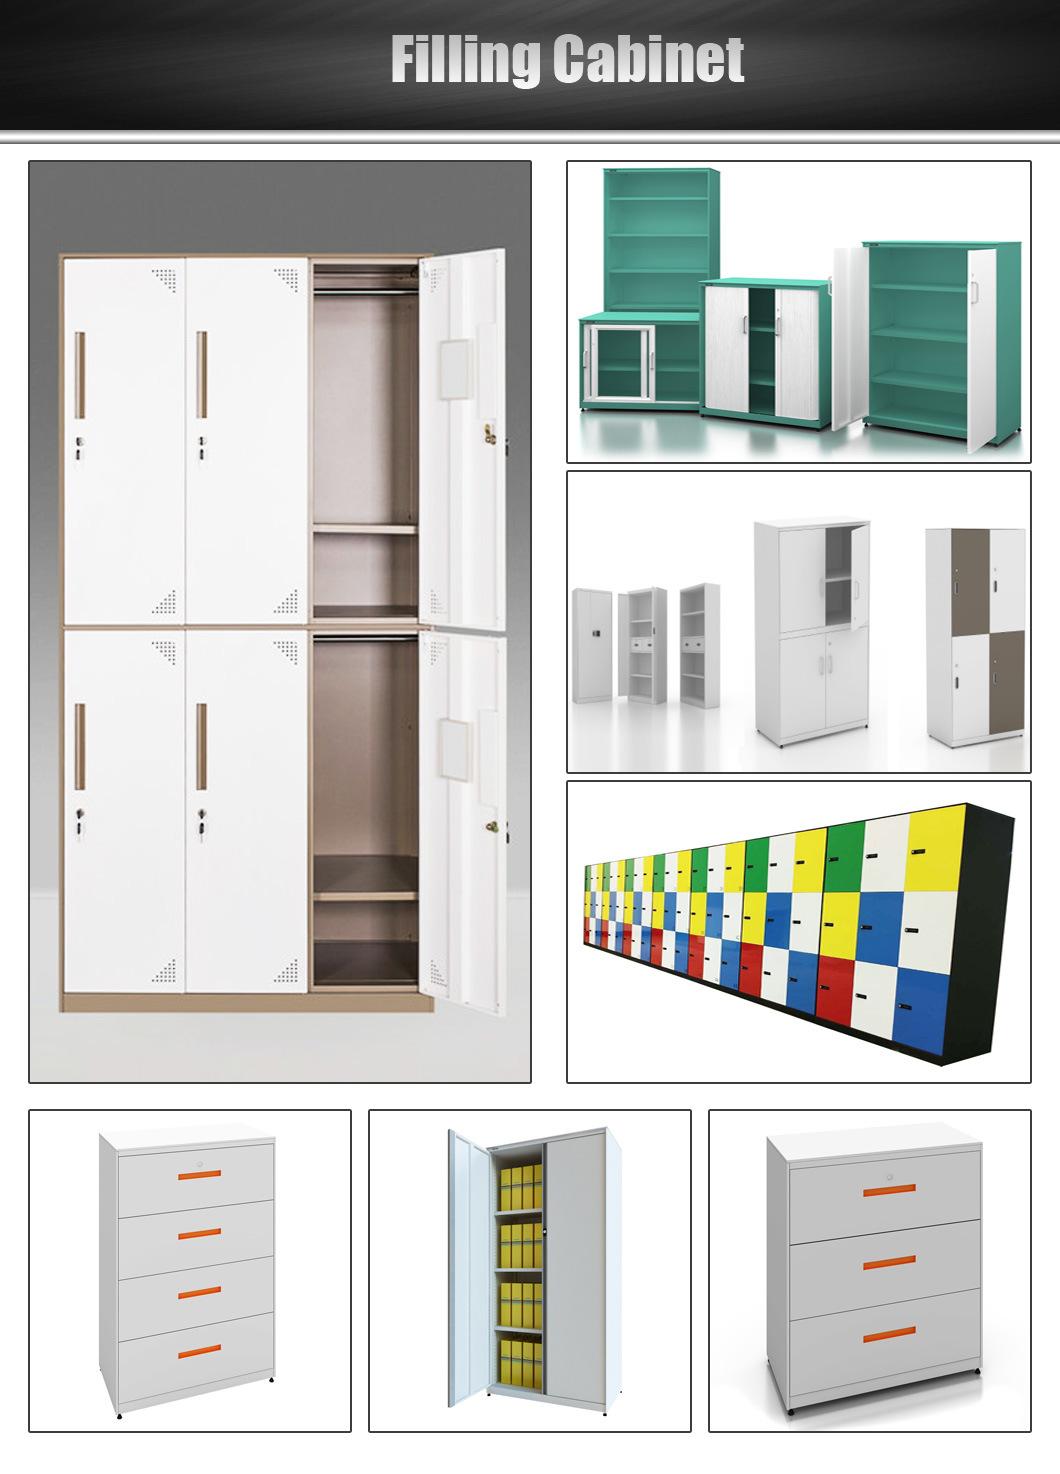 Unequal in Performance Work Storage Cabinets with Environmentally-Friendly Materials